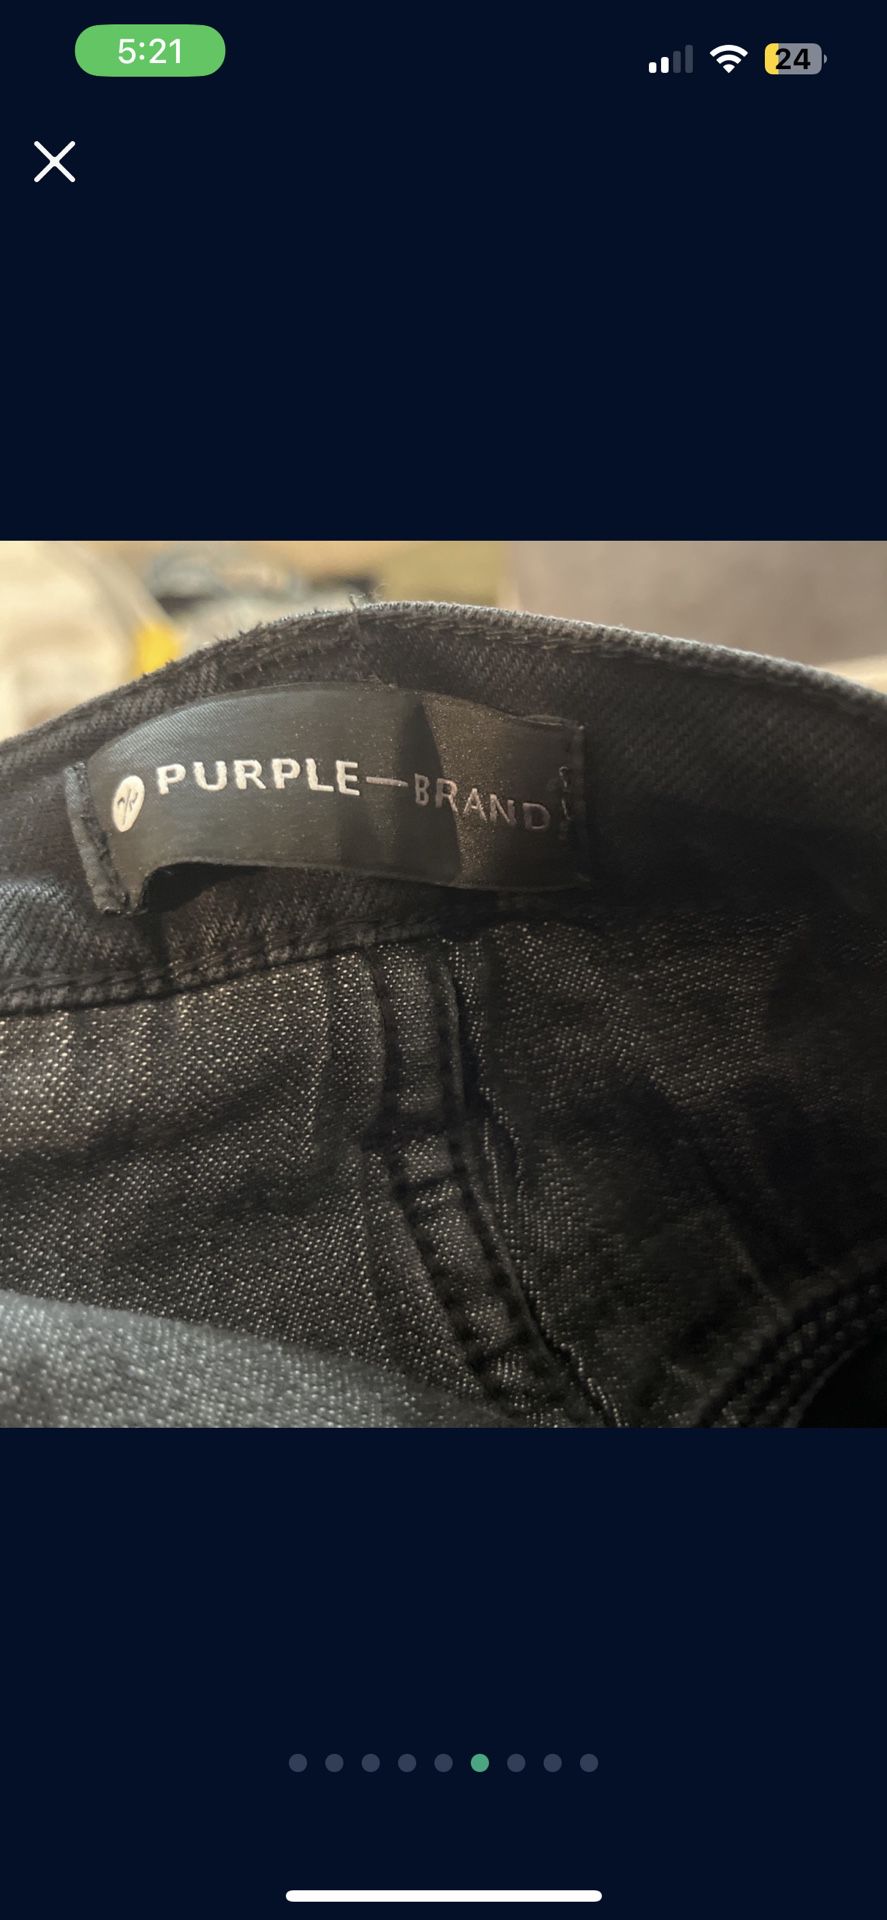 Purple Brand Jeans Not Firm On Price for Sale in Santa Clarita, CA - OfferUp